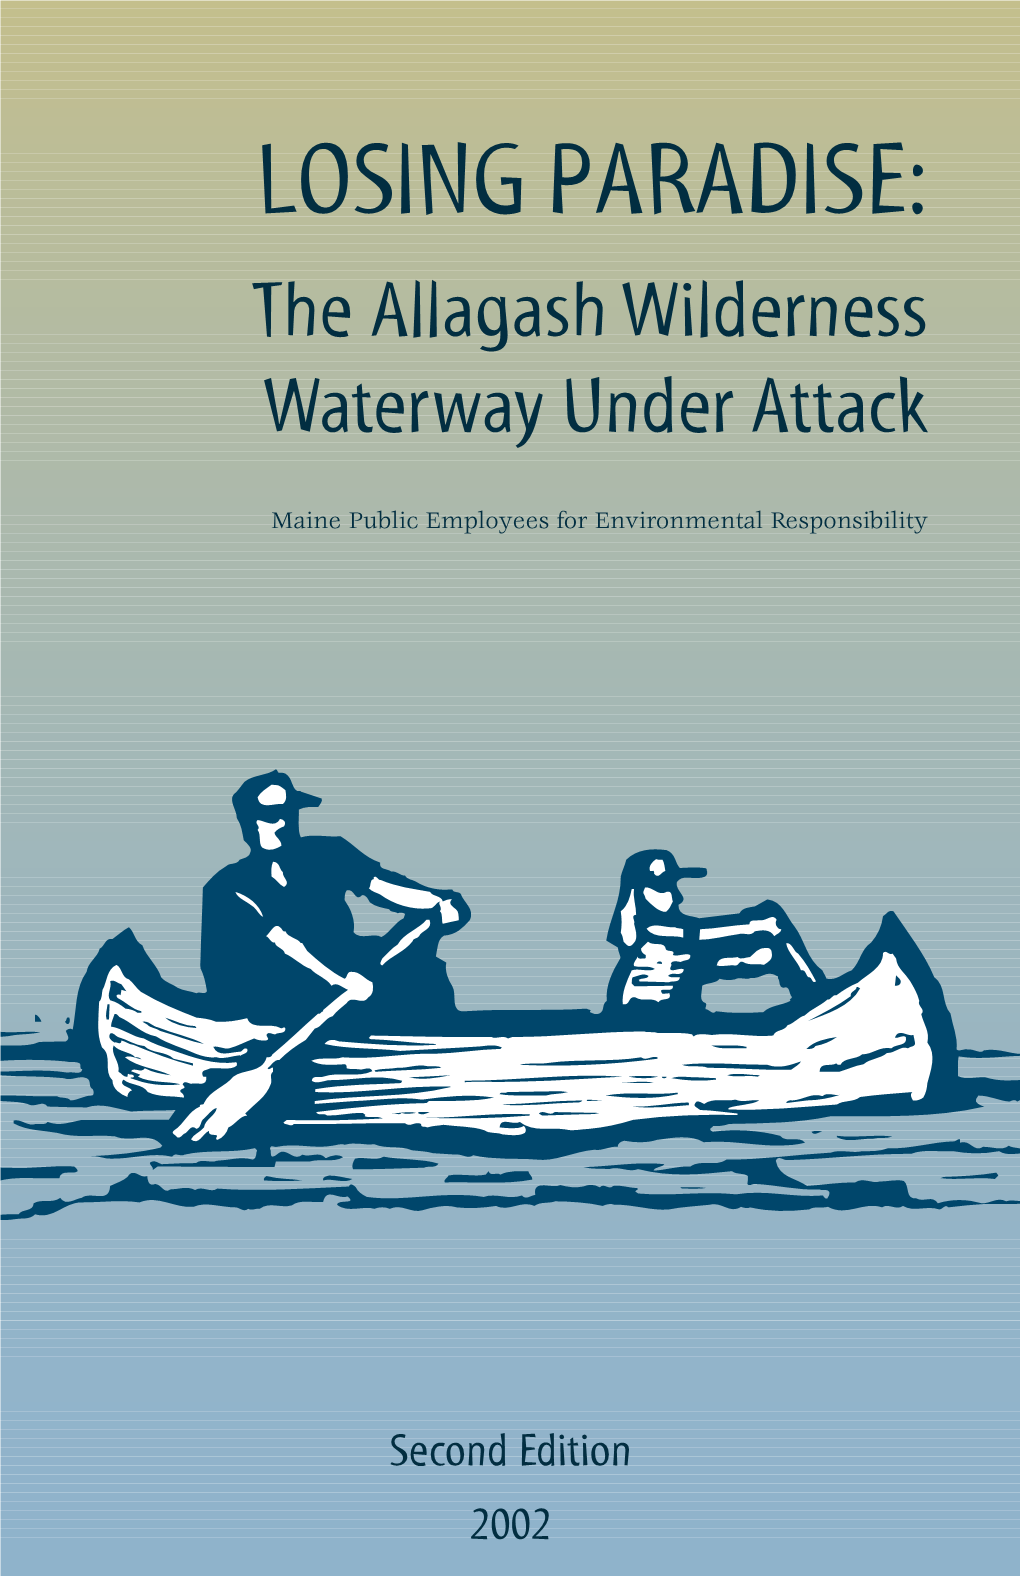 See the PEER White Paper Losing Paradise: the Allagash Wilderness Waterway Under Attack